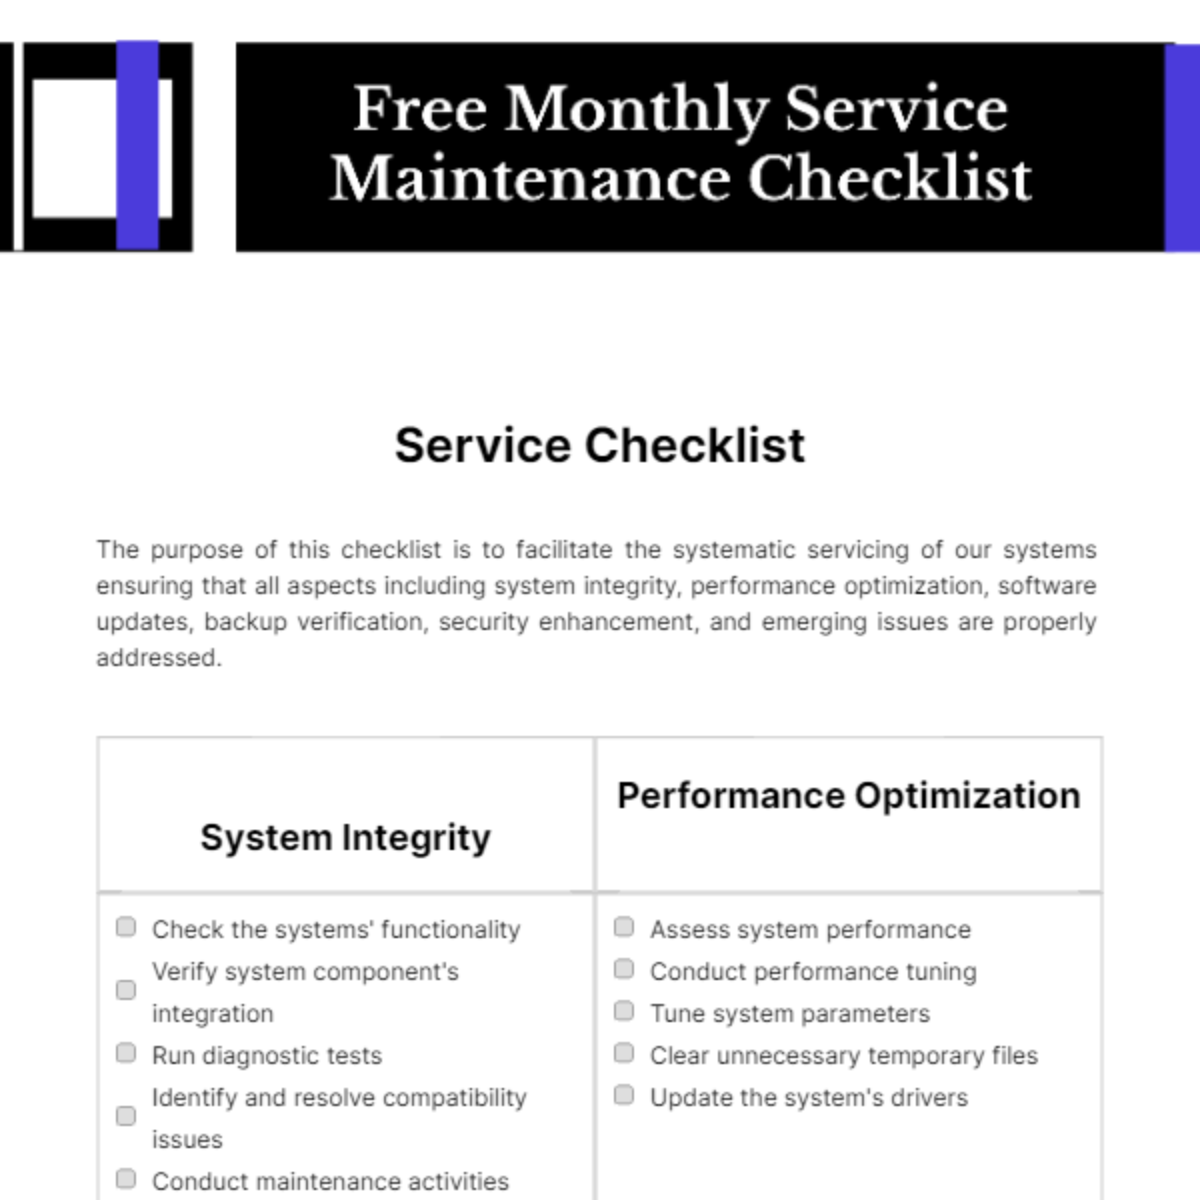 Free Monthly Service Maintenance Checklist Template